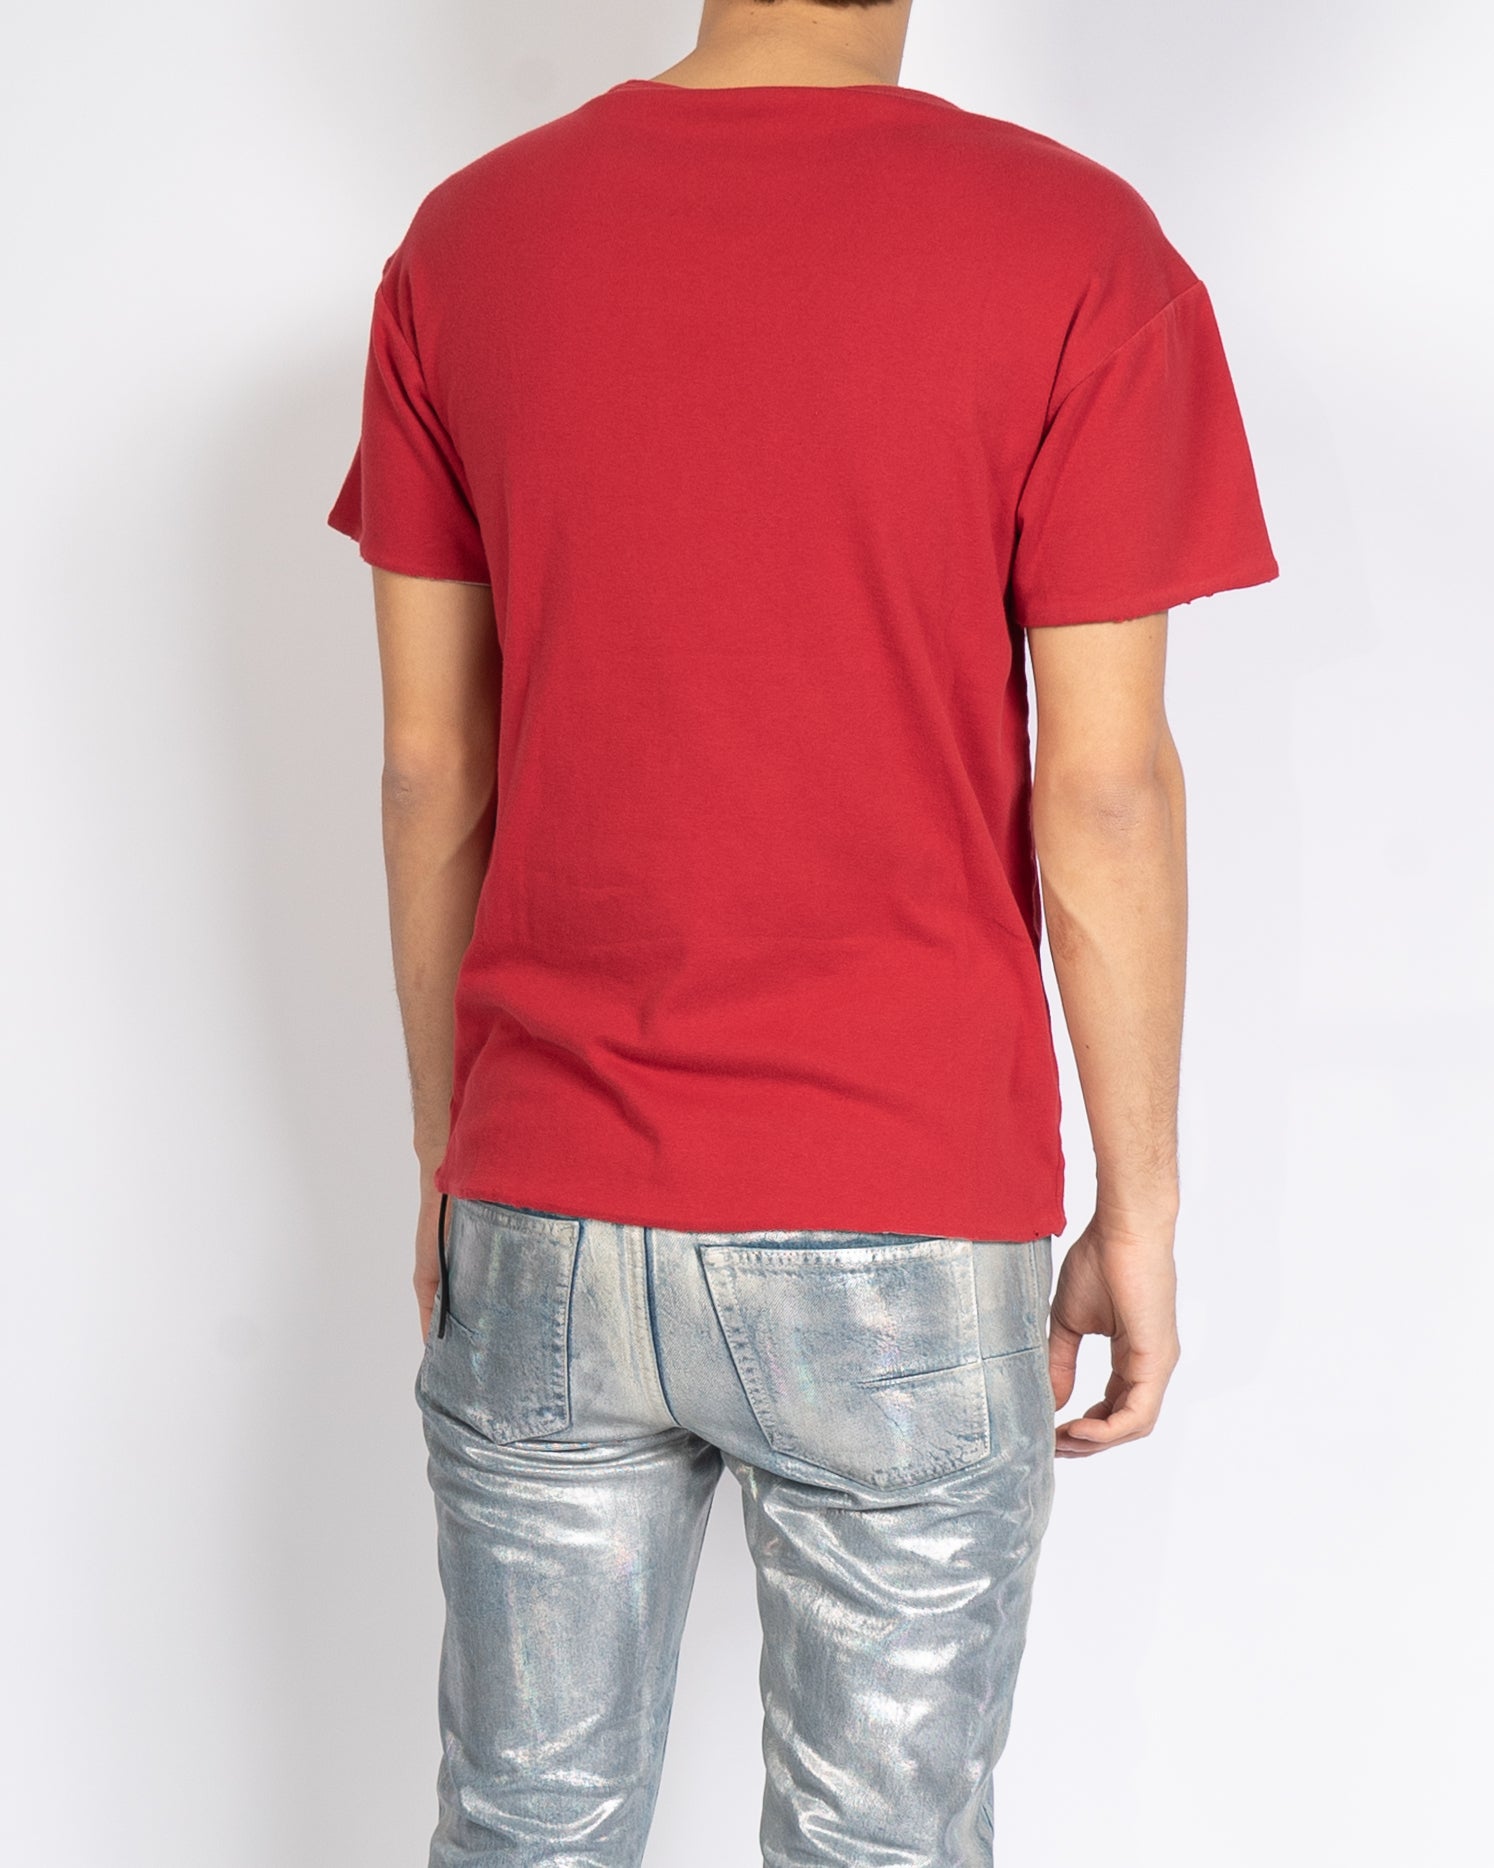 SS19 Jaws Distressed Double Layer T-Shirt